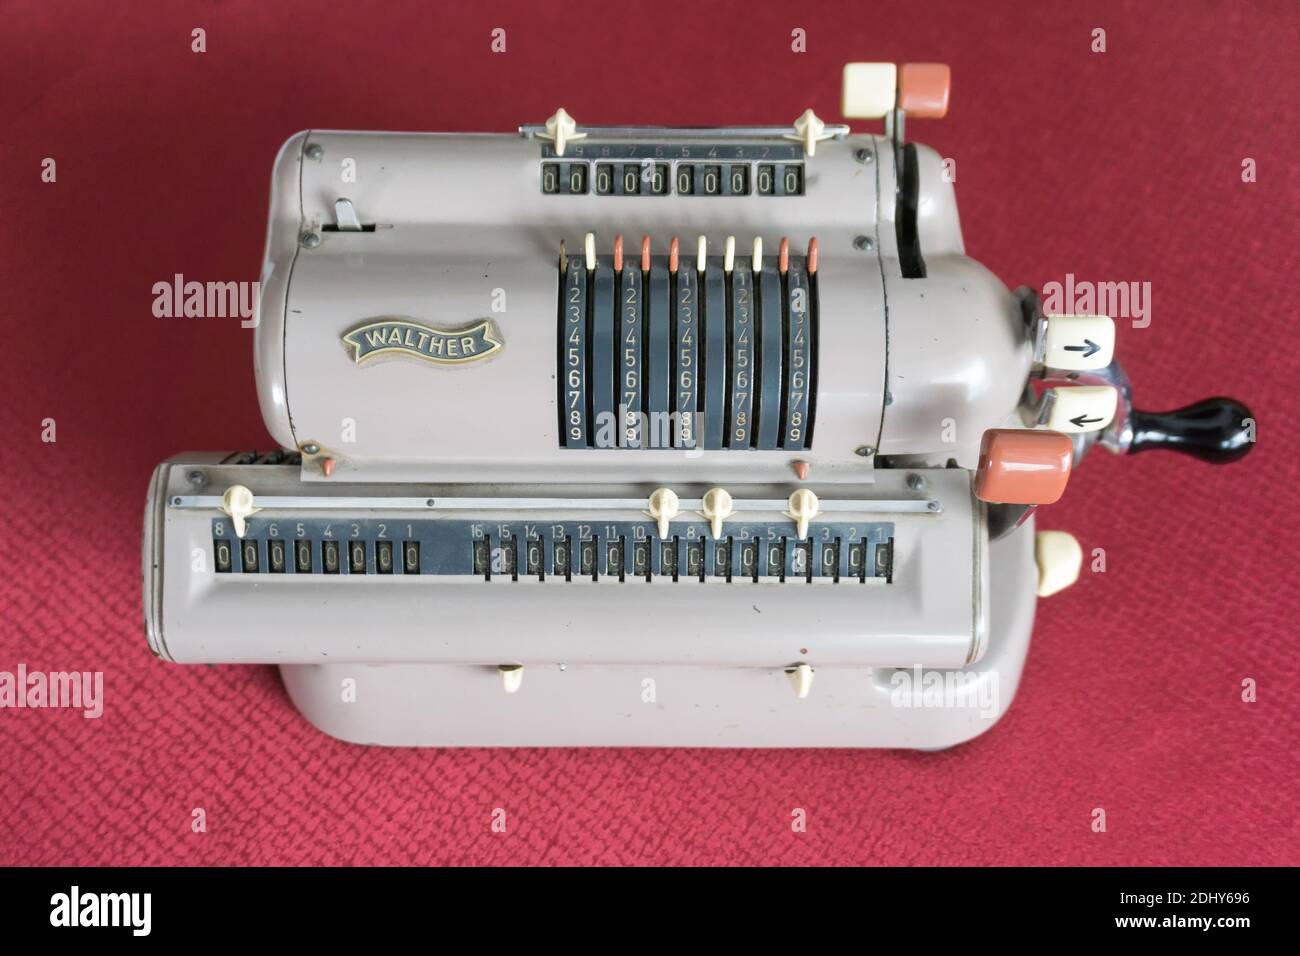 EHRWALD, AUSTRIA - JANUARY 7, 2019: Vintage technical equipment, Walther's mechanical calculating machine. Stock Photo